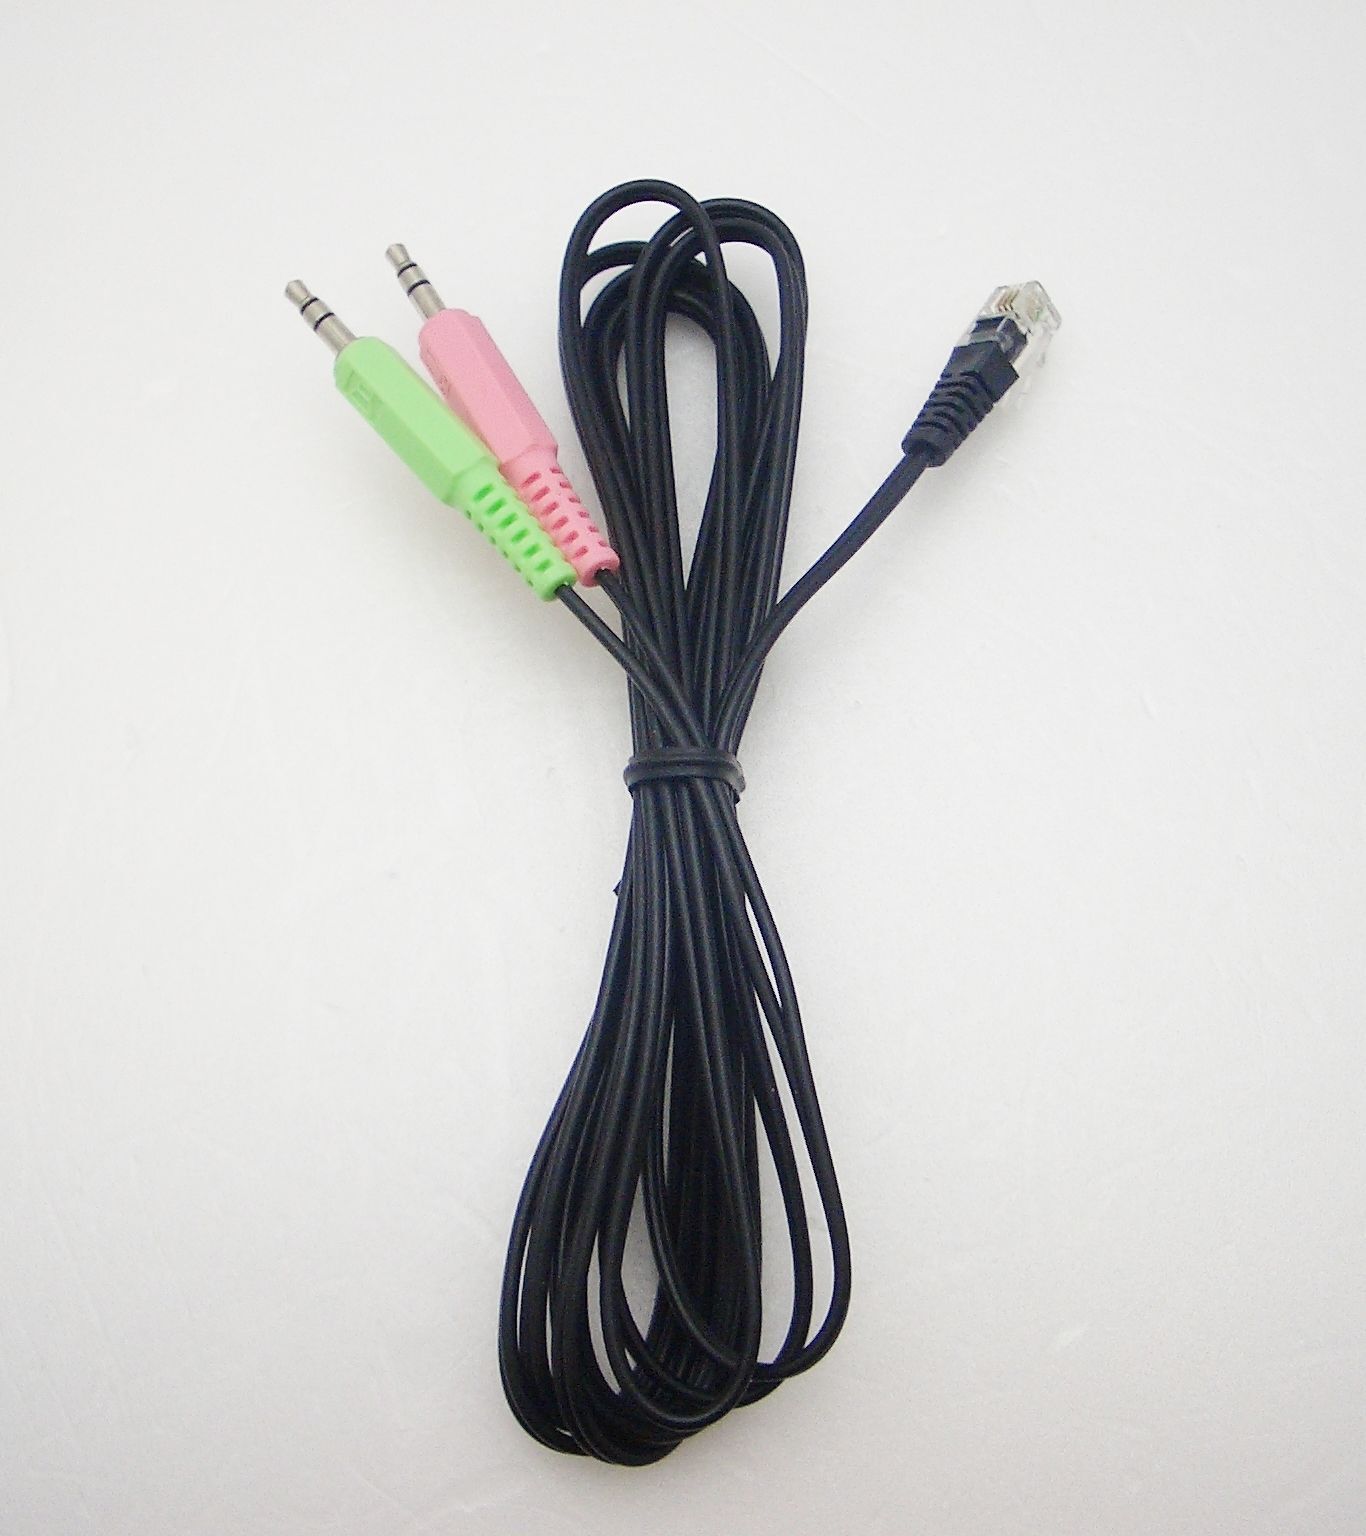 RJ9 Plug to 2 X 3.5mm Plugs Cable for Polycom IP500 to PC for online conference